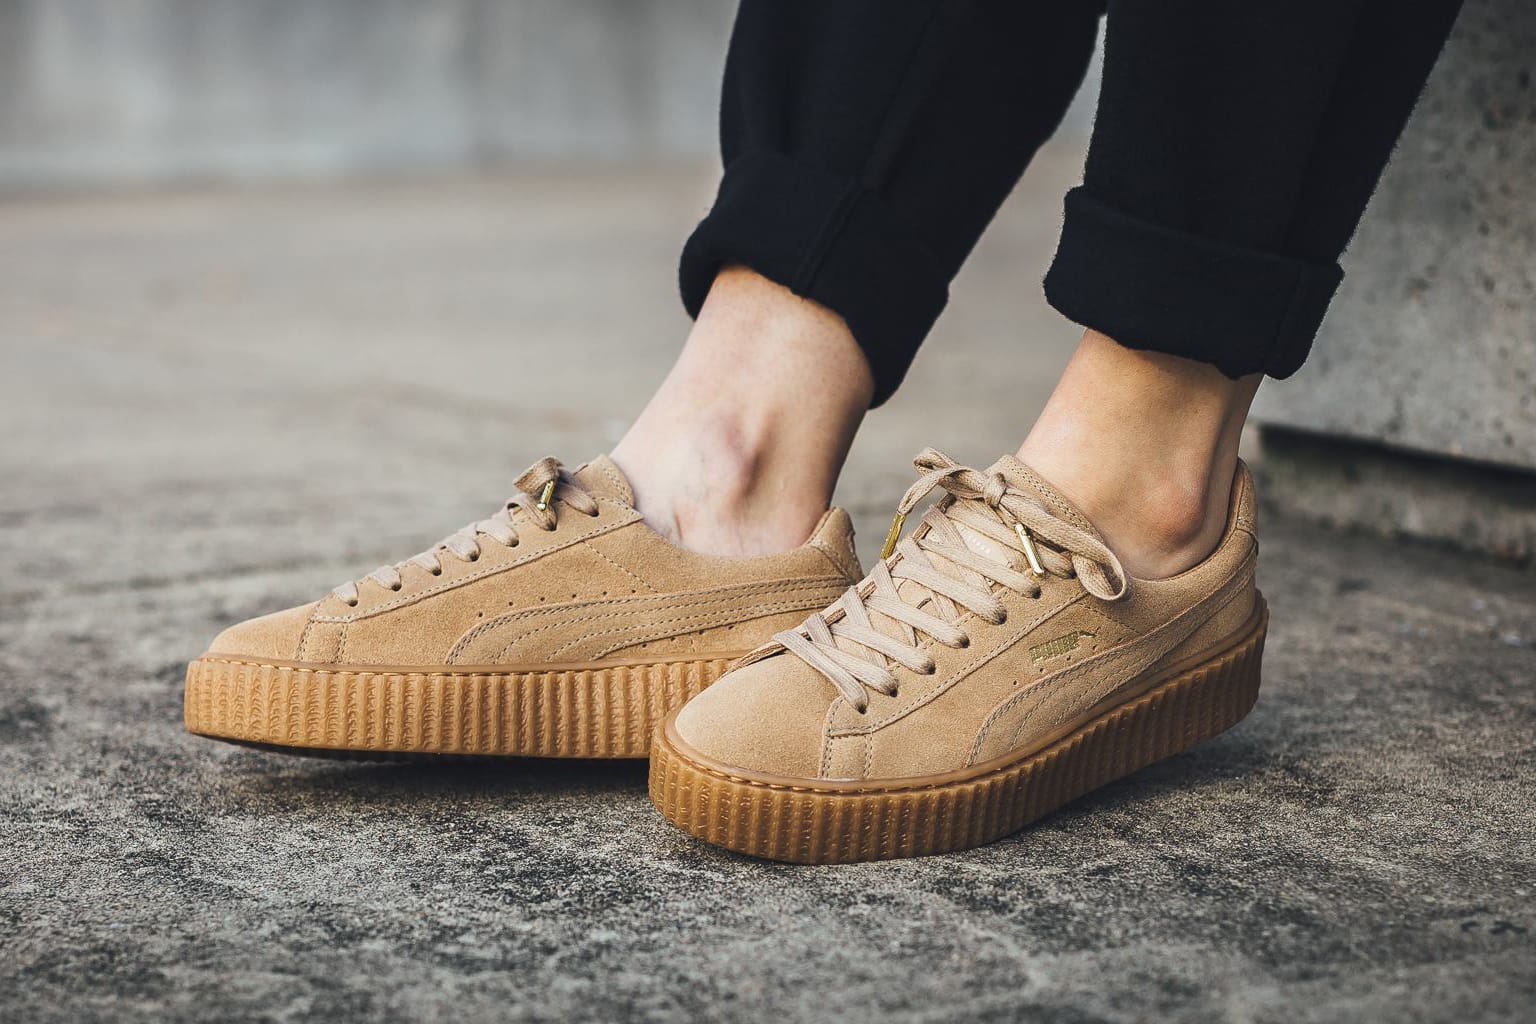 Rihanna re-releases her PUMA creepers 